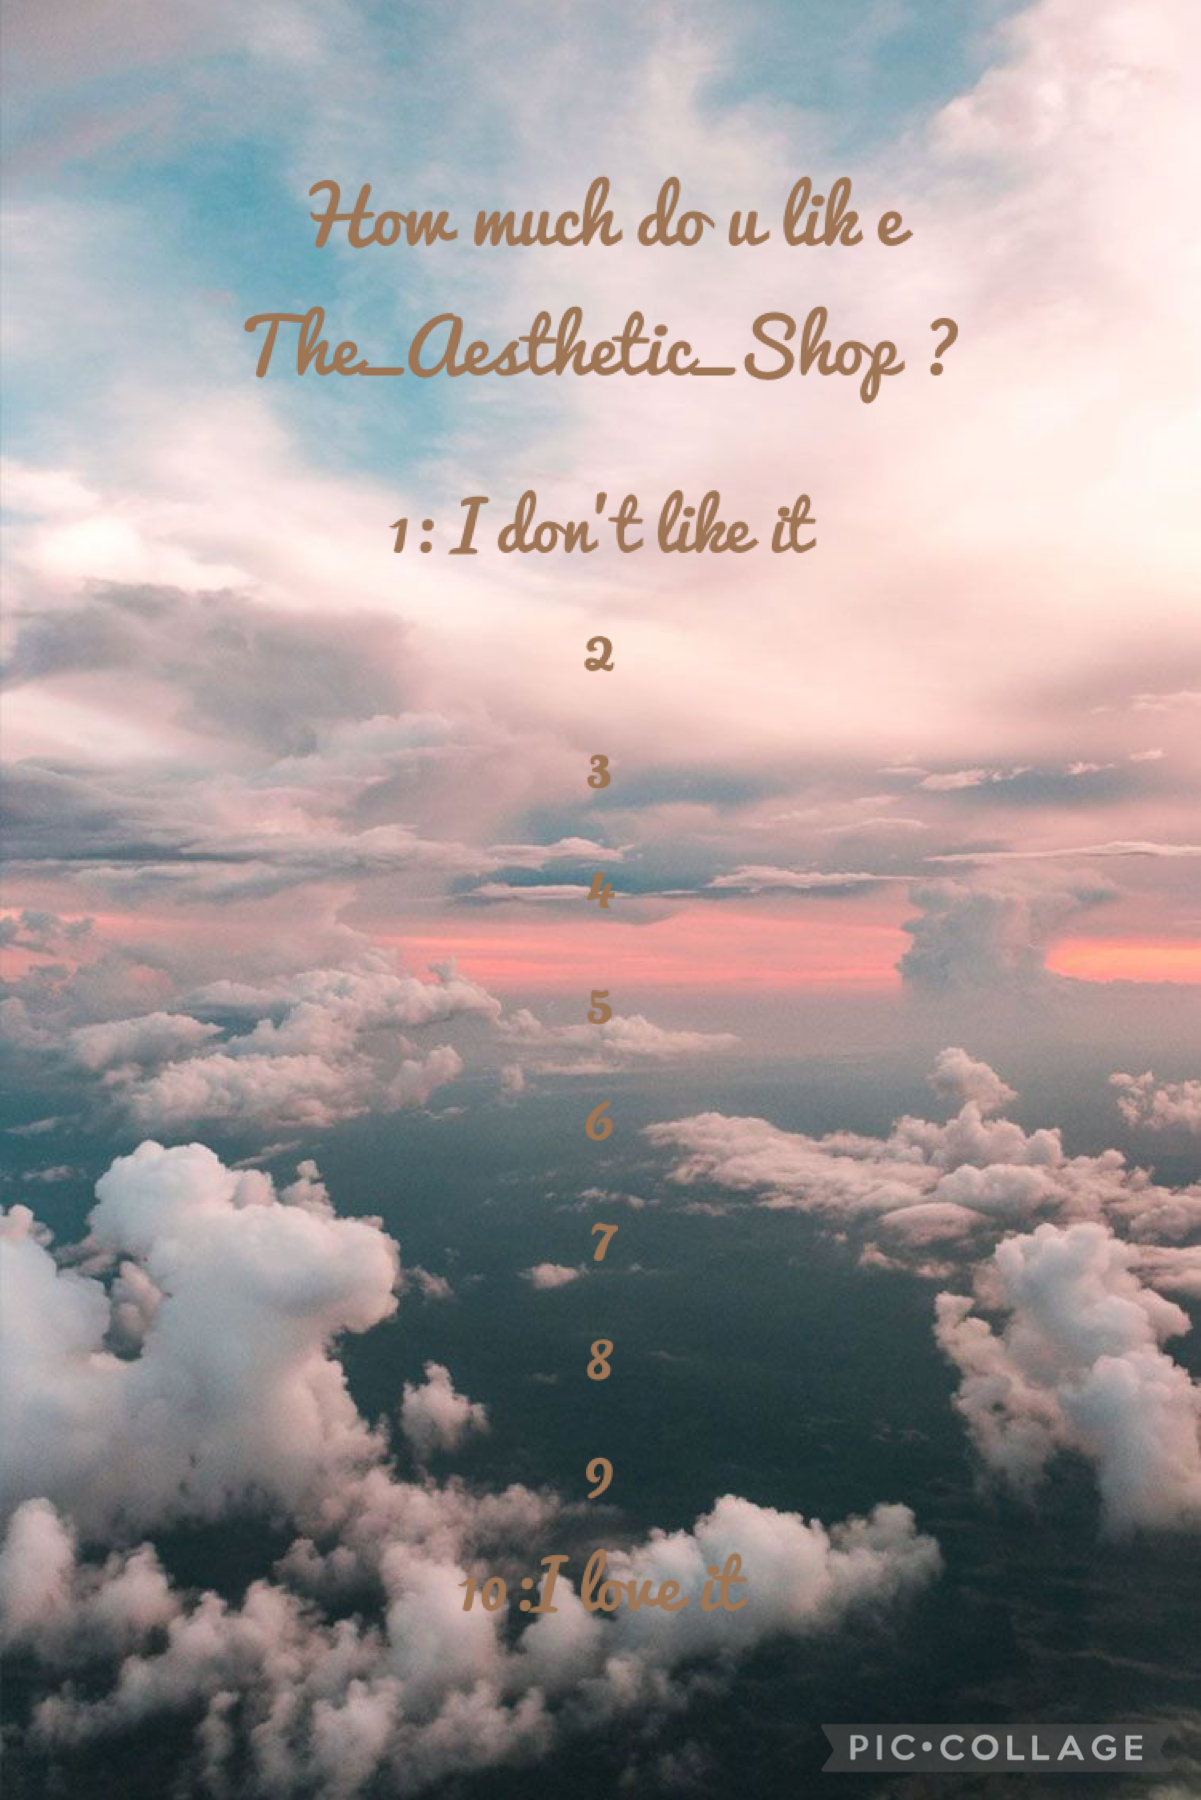 ☁️Tap☁️
I know I haven’t posted In a while but I was still wondering how you feel about the aesthetic shop 